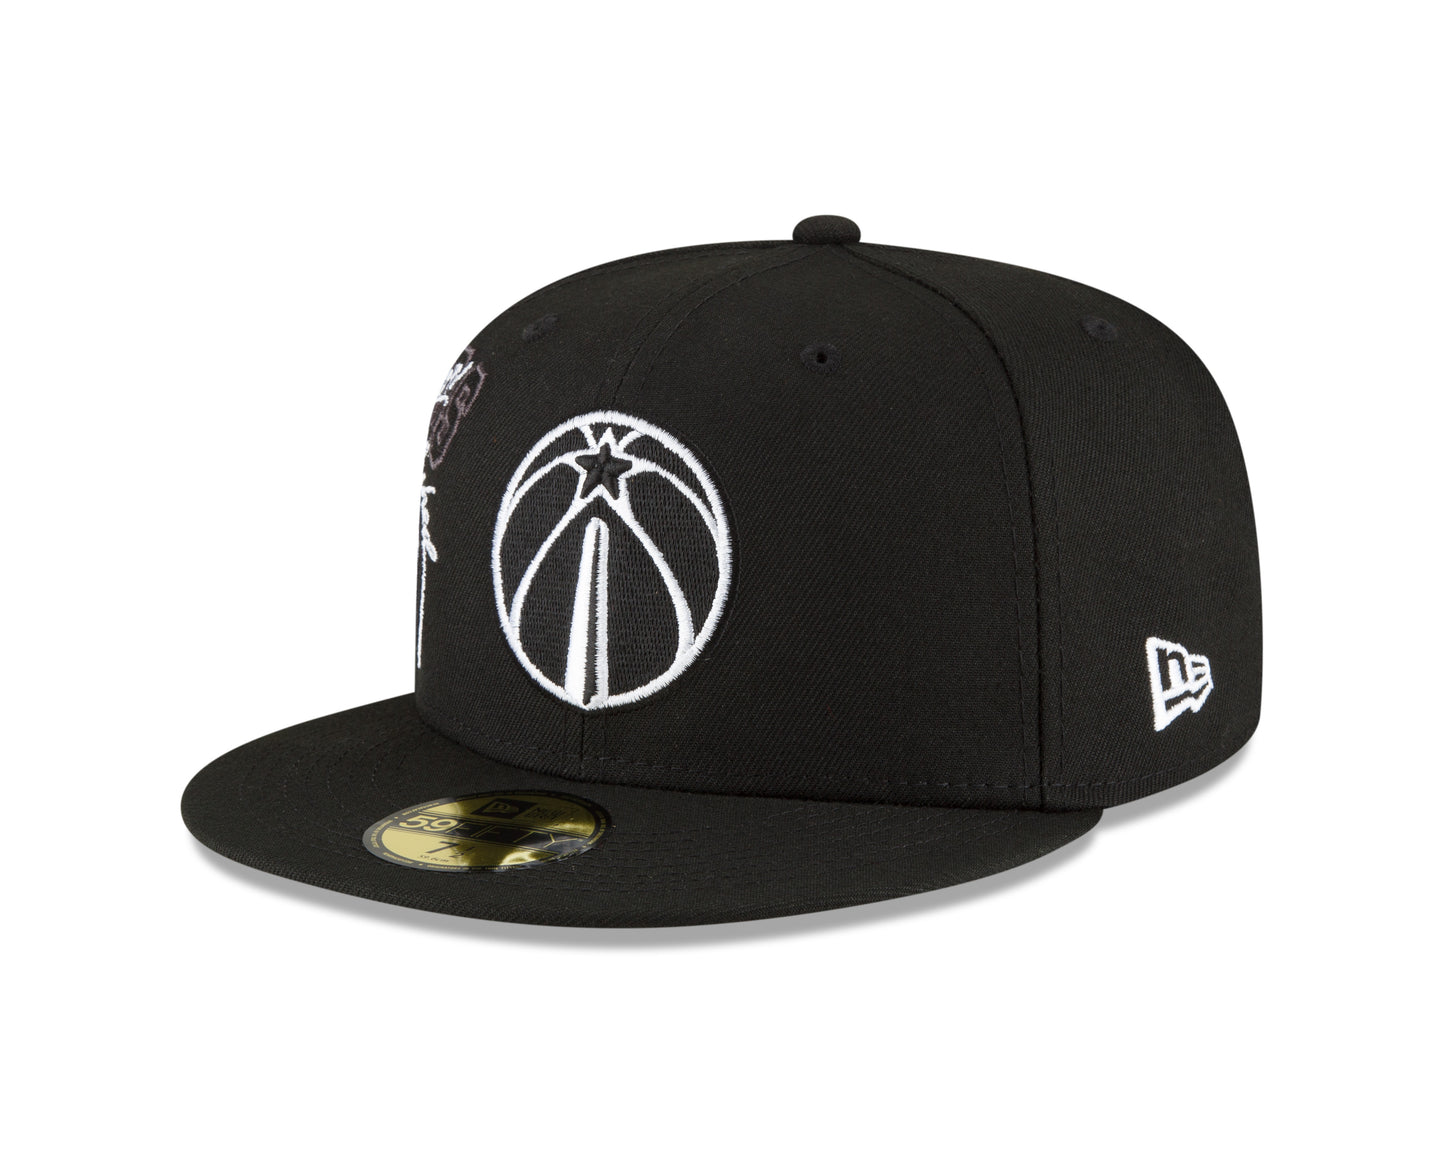 Washington Wizards New Era Black and White Back Half 59fifty Fitted Hat